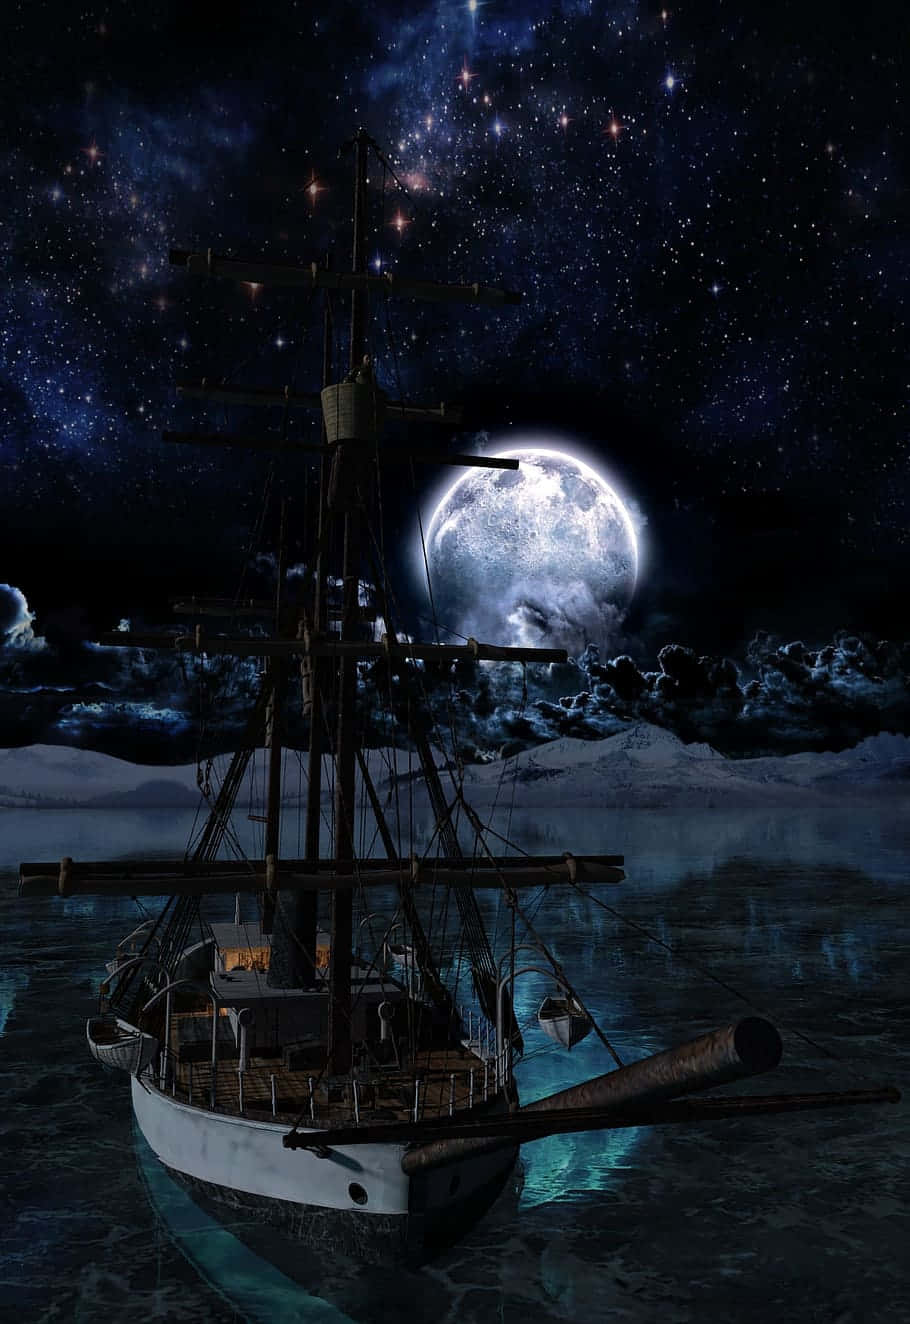 Beautiful Magical Night Sky With Boat Sailing With Giant Moon